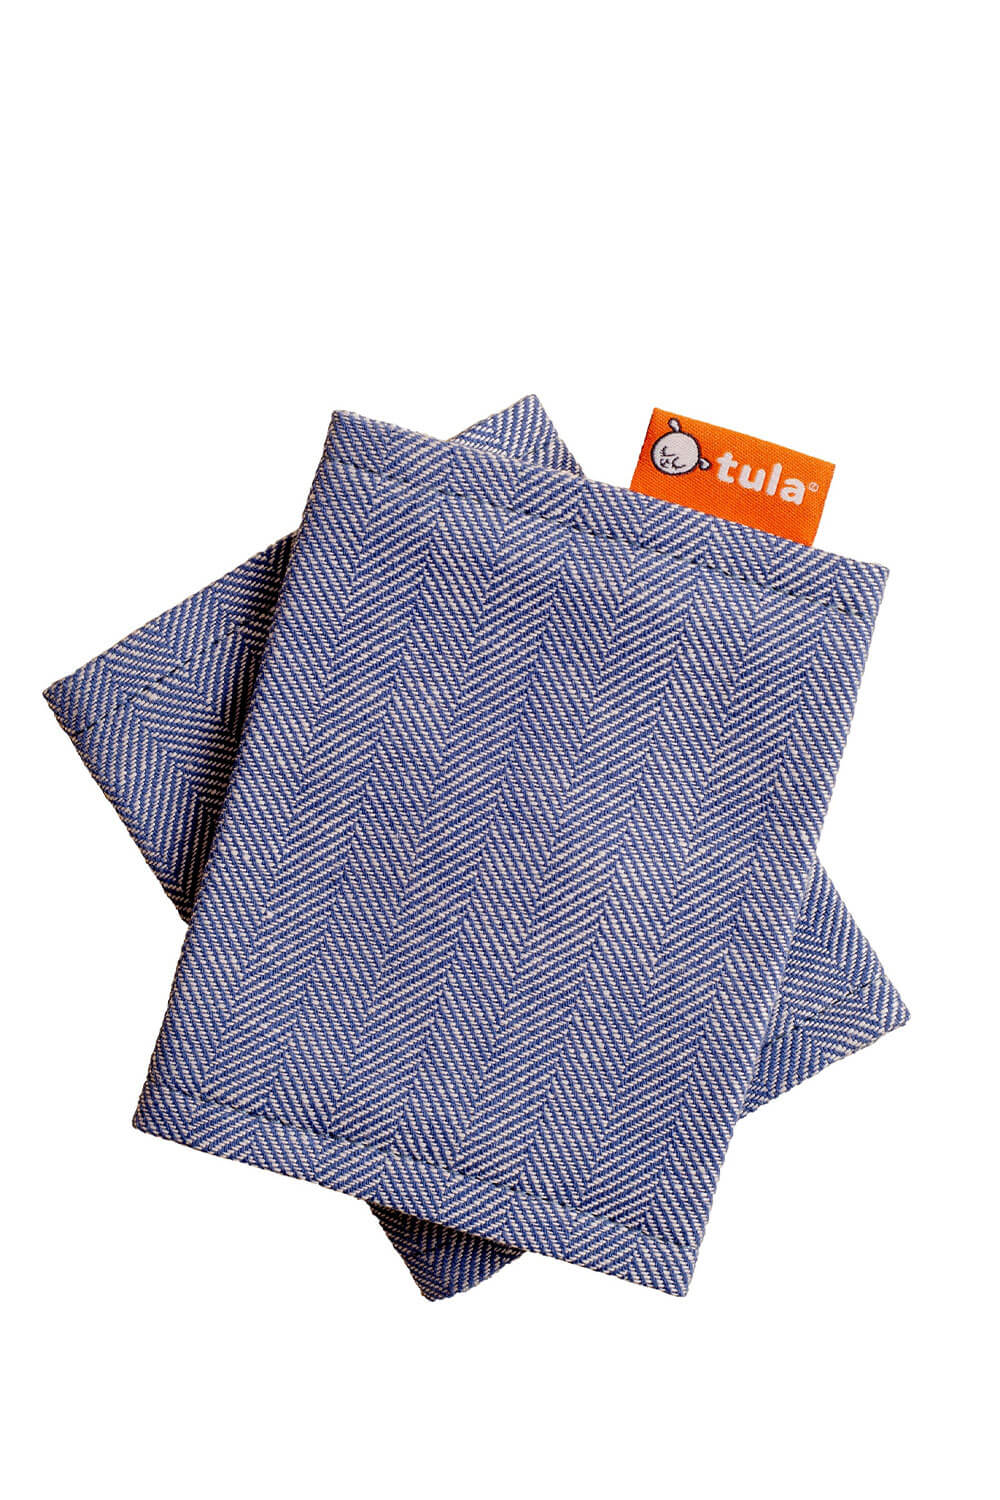 The Droola Strap Covers Linen Rain from Tula, to protect the straps of your Baby Carrier.